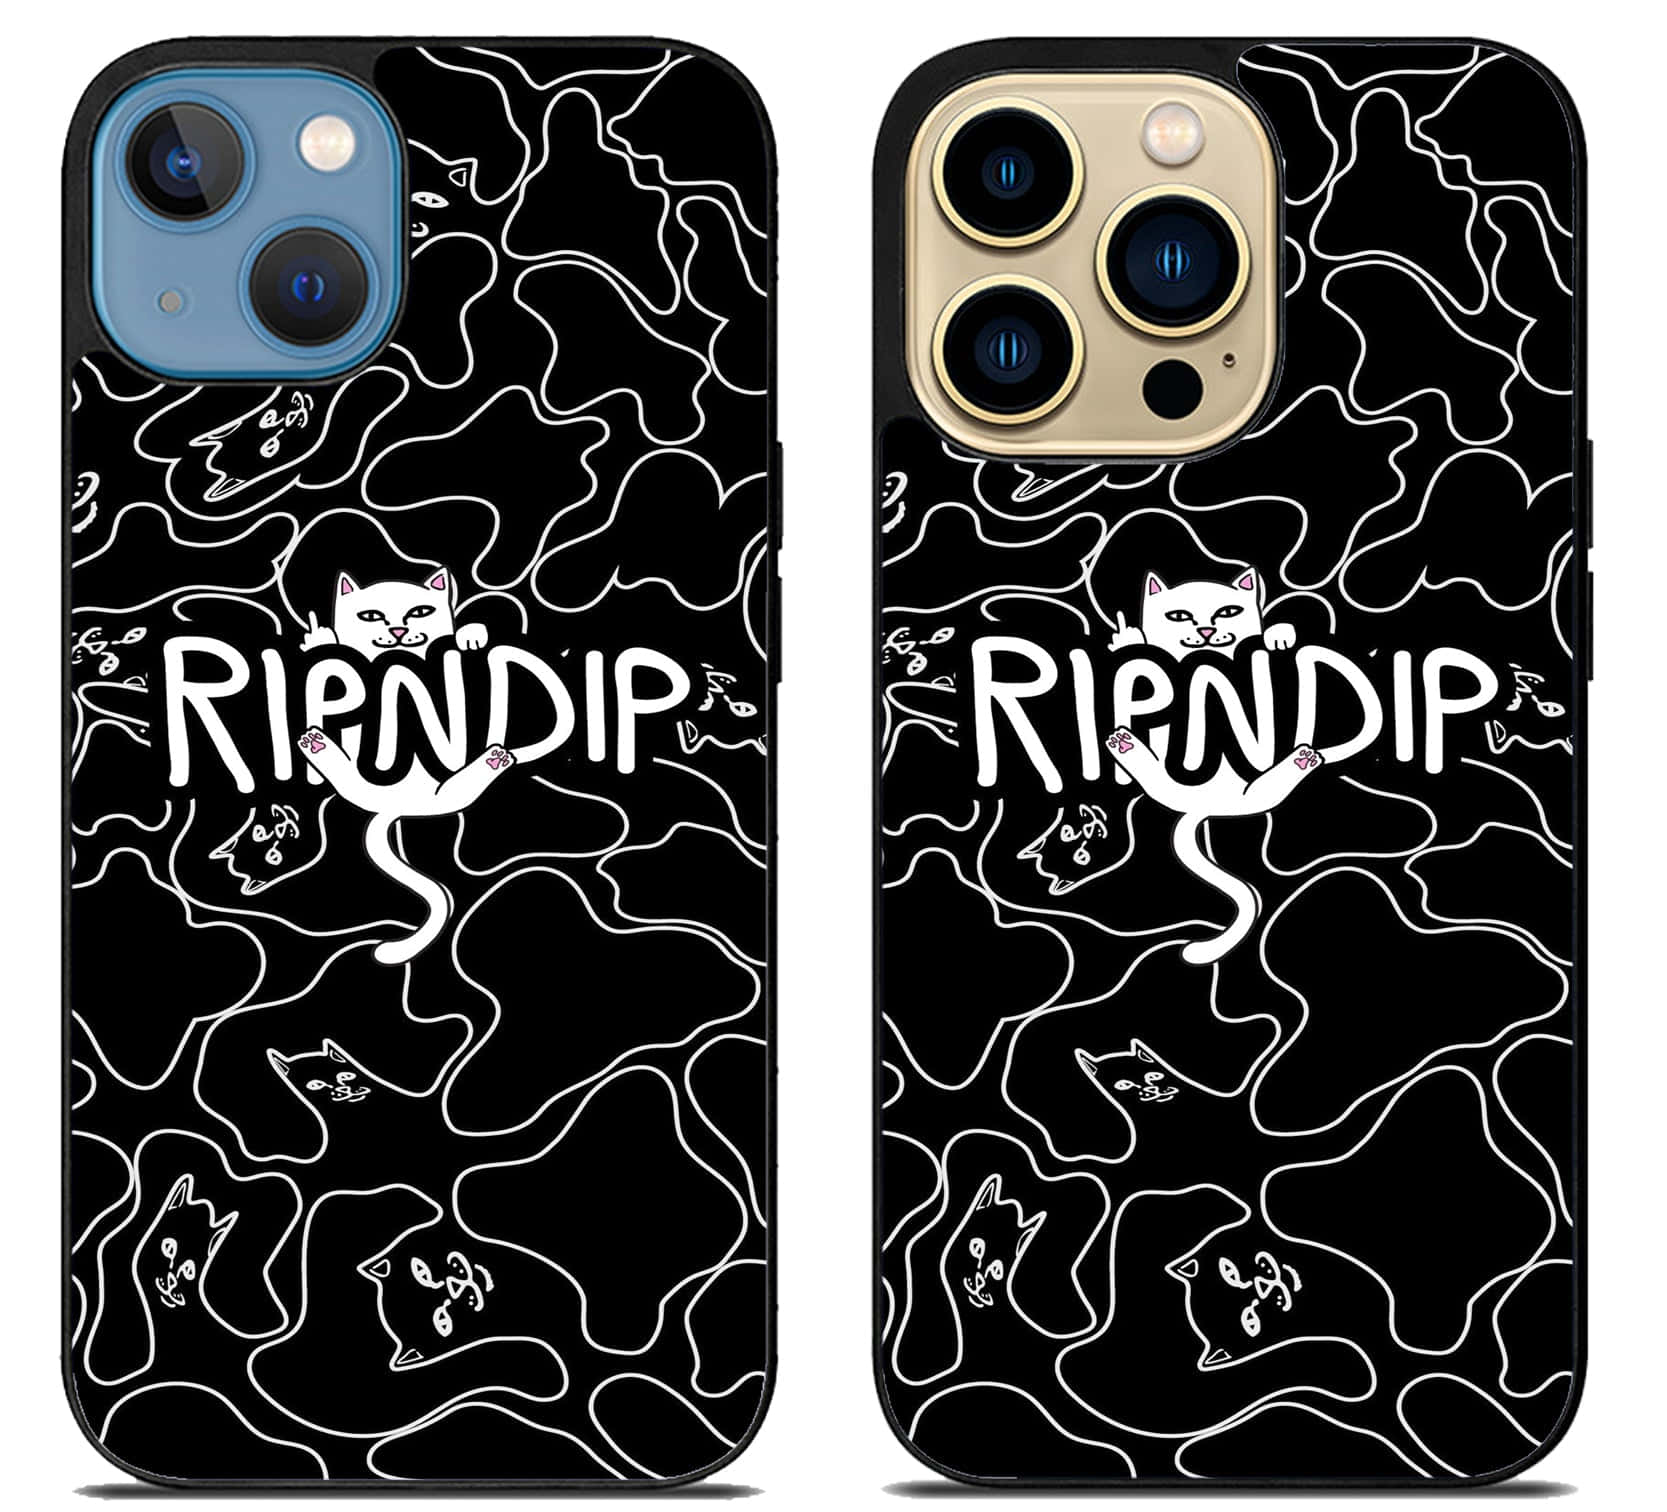 Standing Out From The Crowd With Ripndip Background